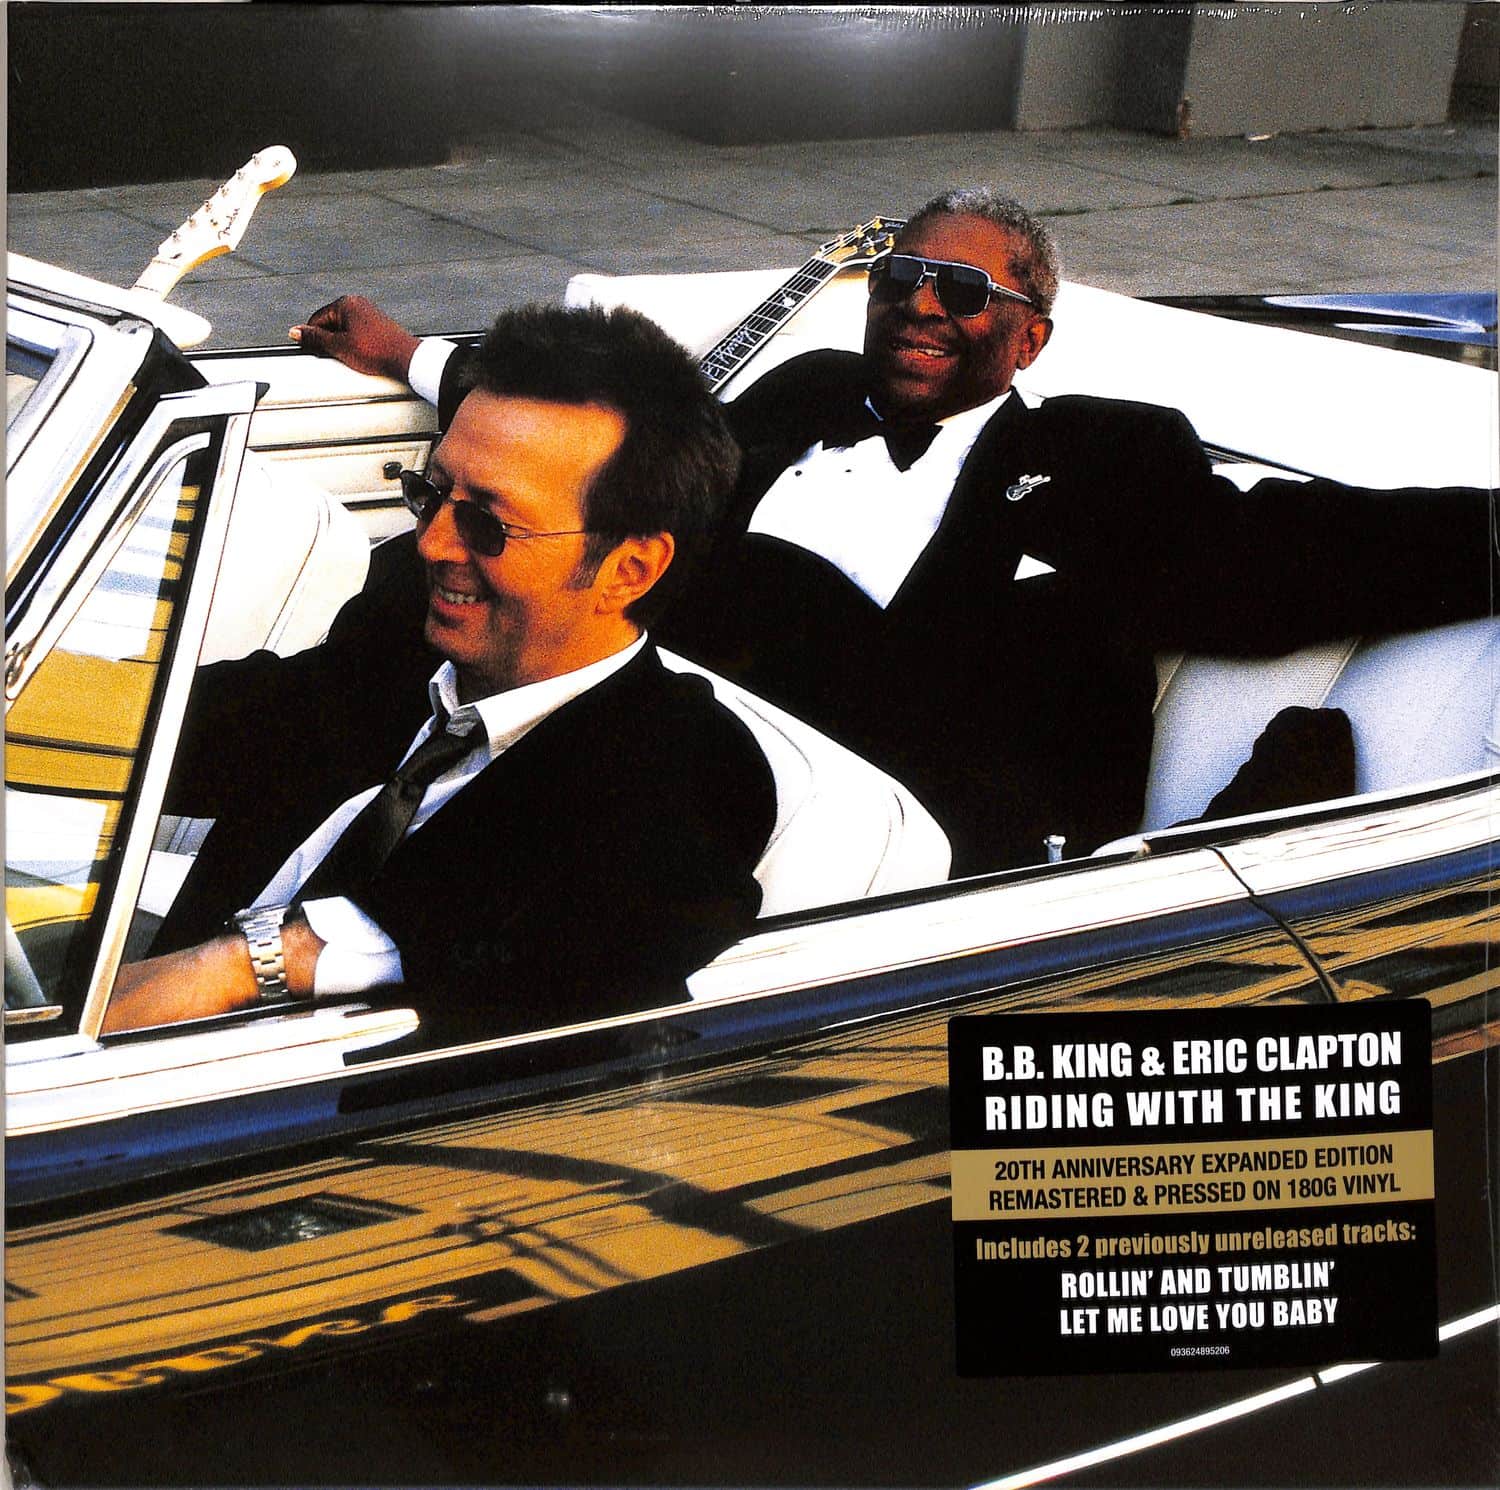 B.B. King & Eric Clapton - RIDING WITH THE KING 